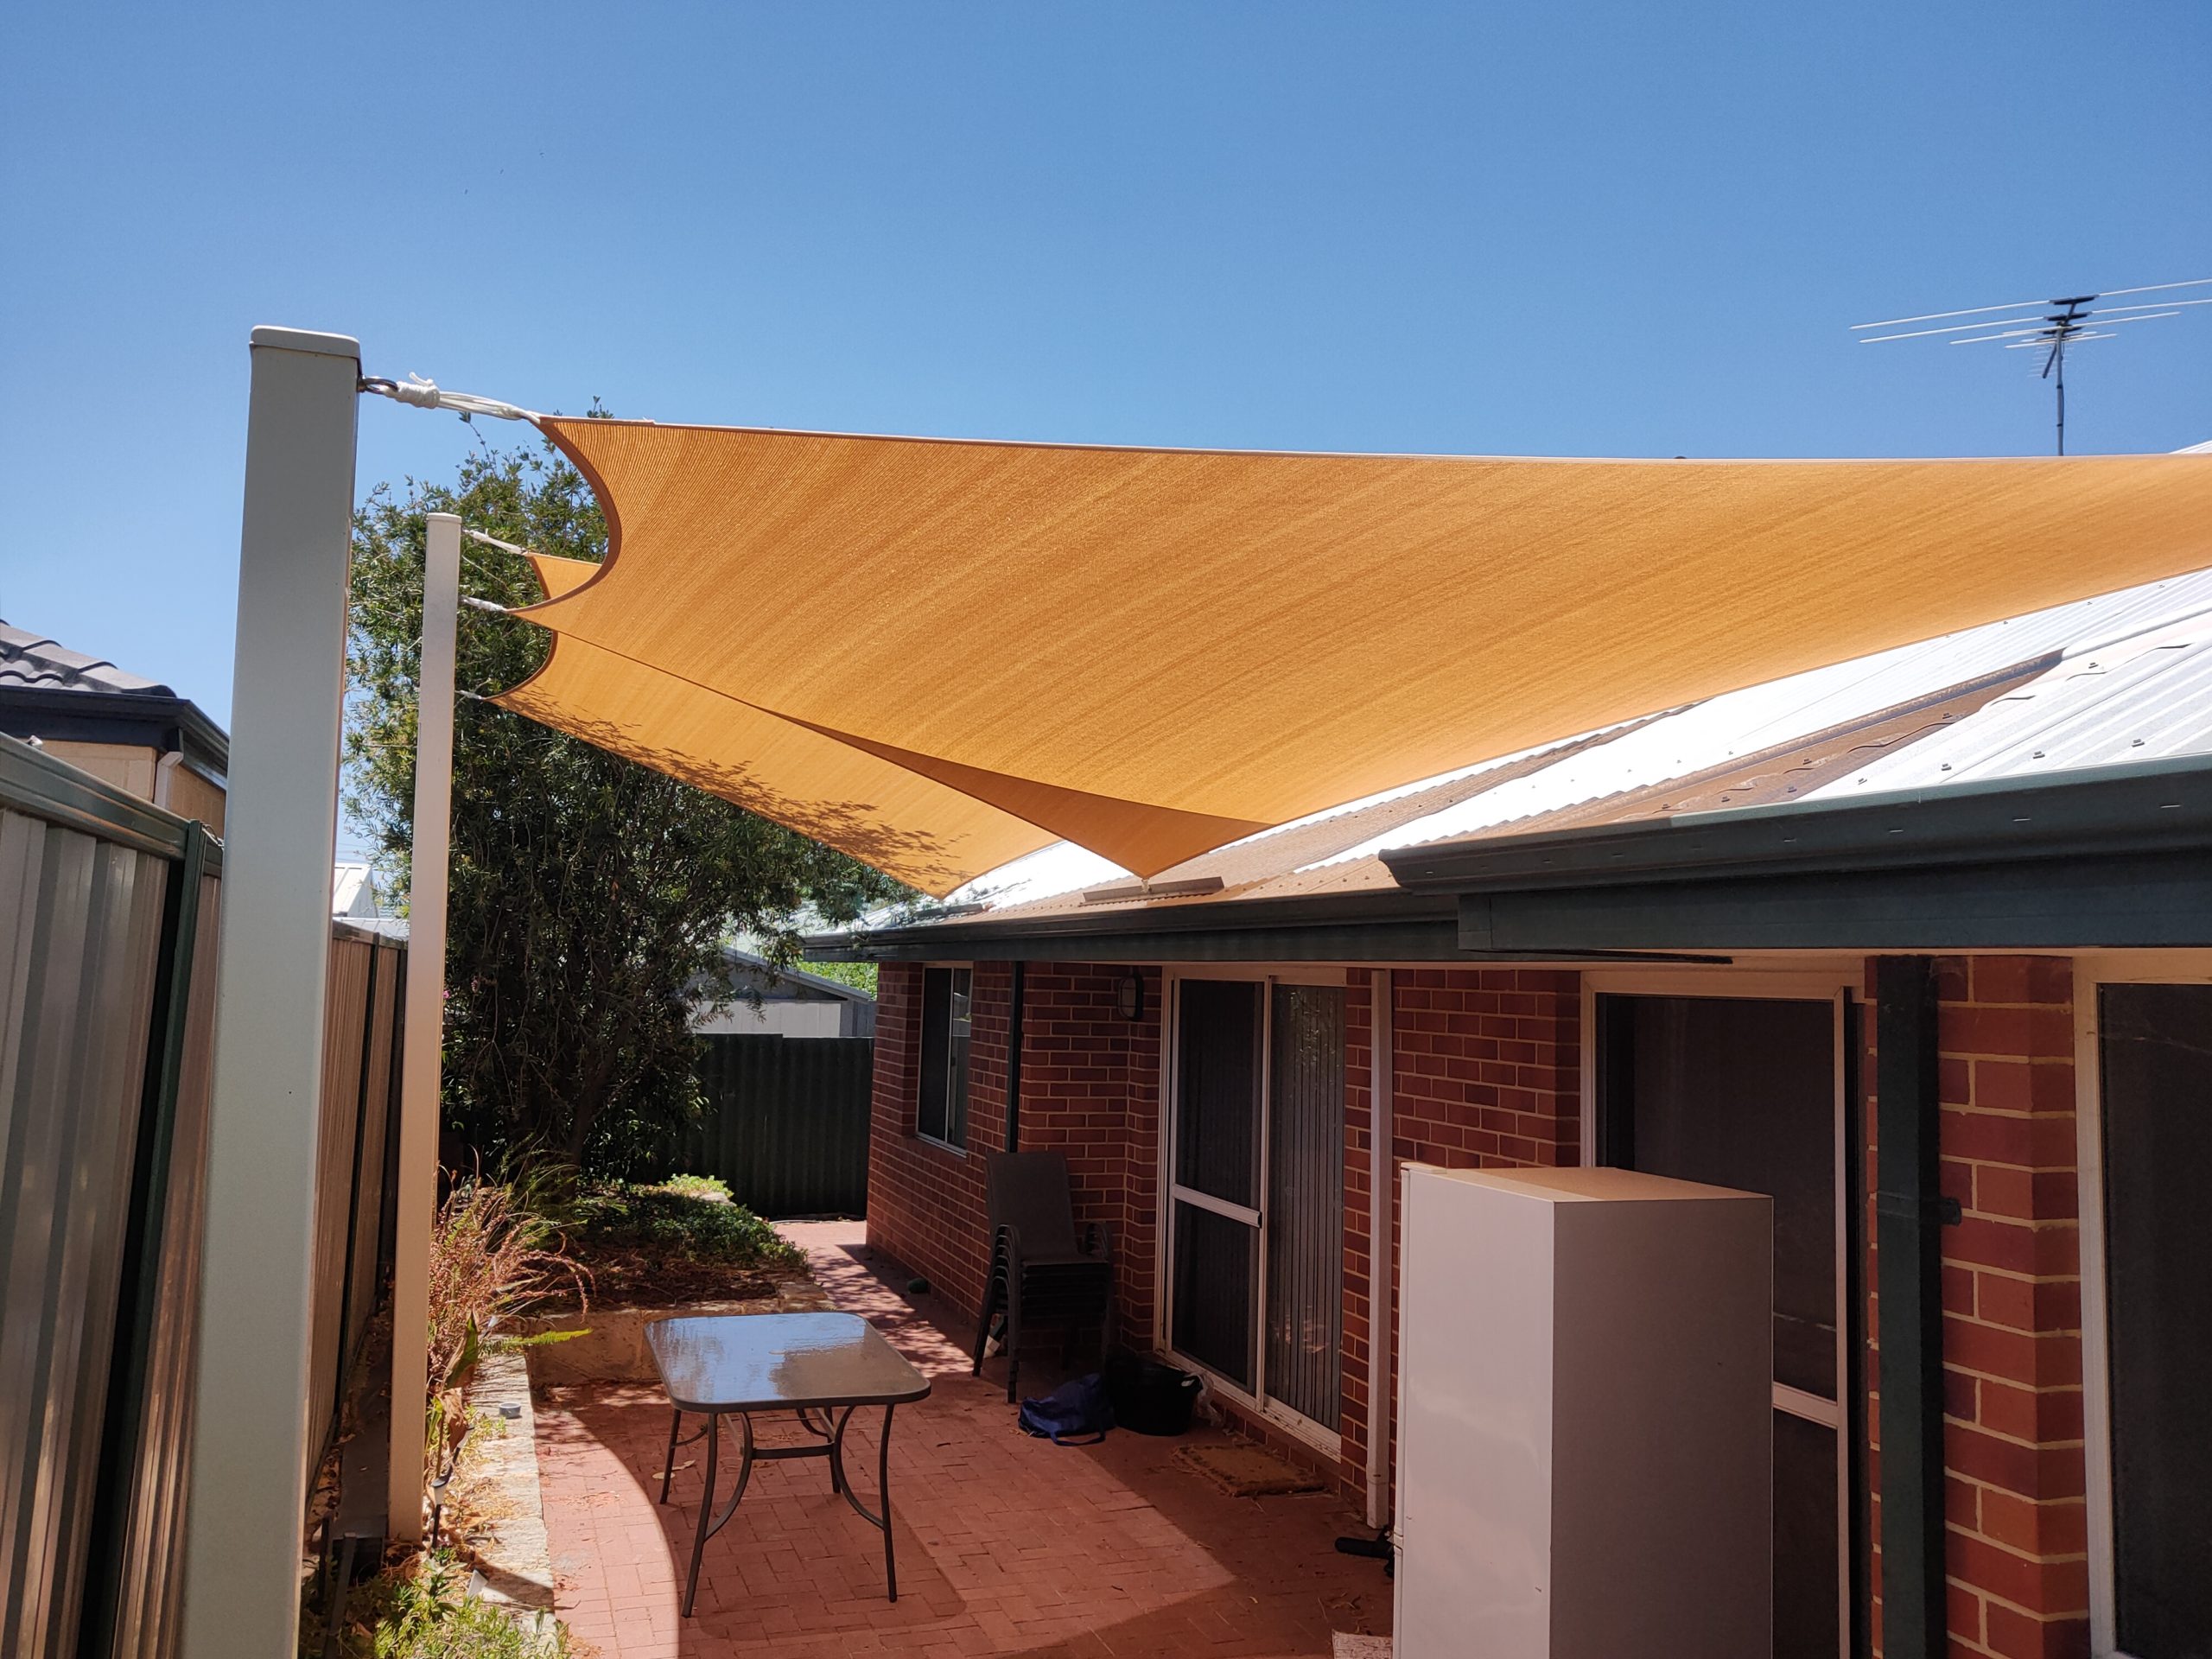 Shade sails over a courtyard